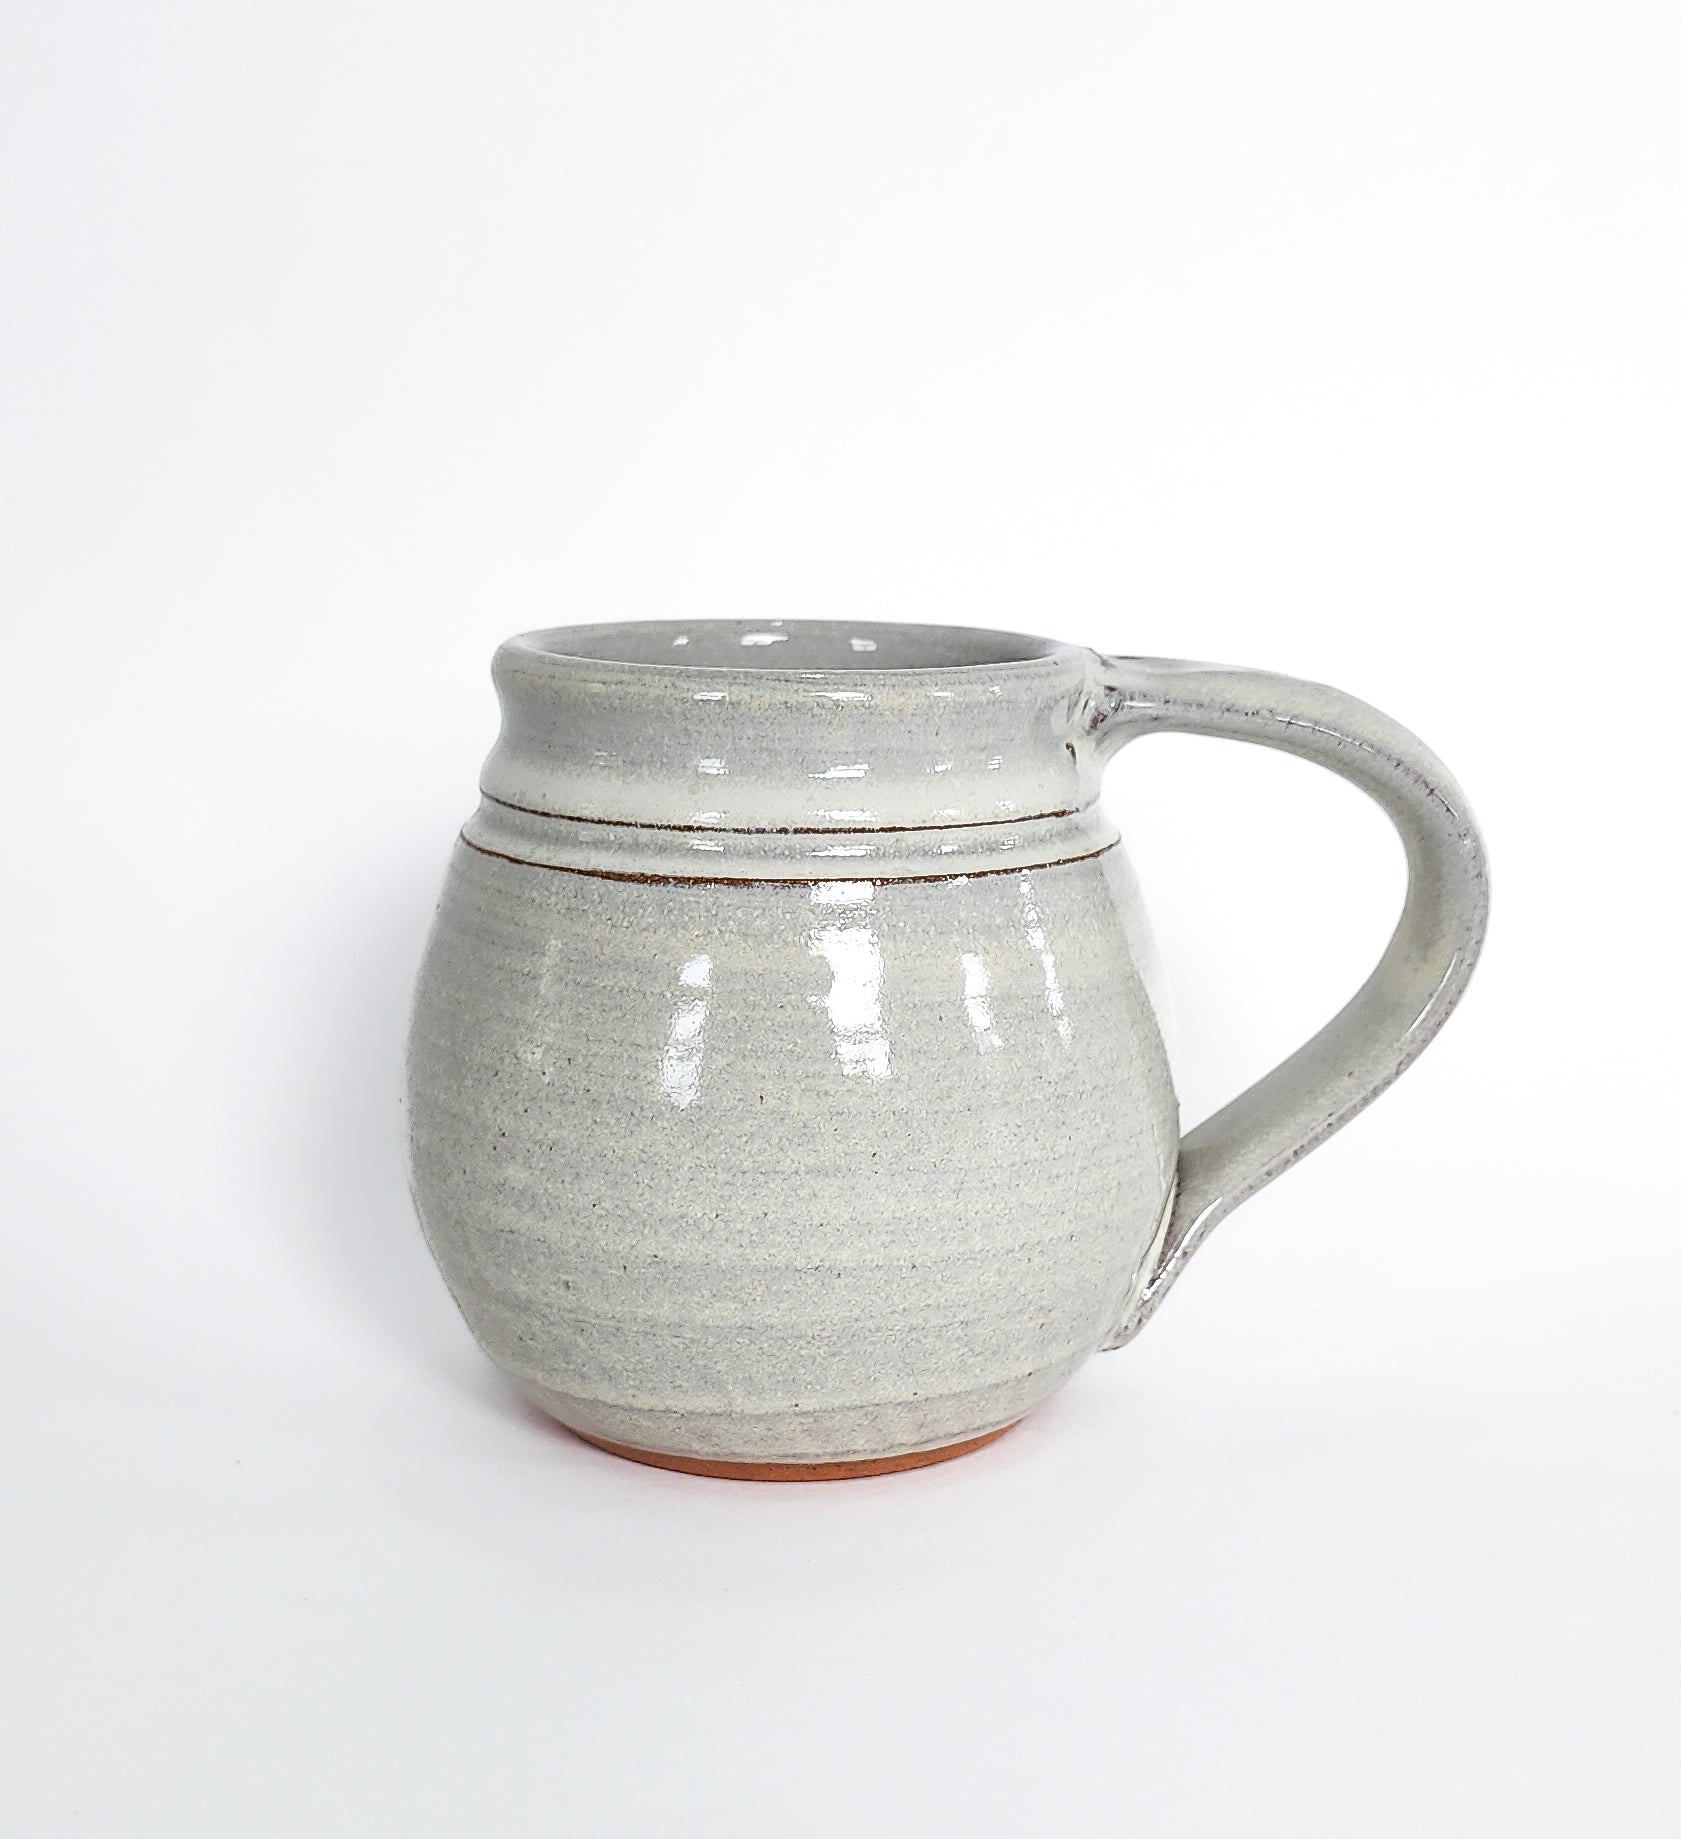 Image: Clinton Pottery's Handmade Medium Mug in White – A timeless and versatile 14-16 oz mug, expertly crafted. This White piece exudes purity and simplicity, reminiscent of fresh snowfall and clean elegance. Perfect for savoring moderate quantities of your favorite coffee or tea, it seamlessly combines classic style with functionality. 